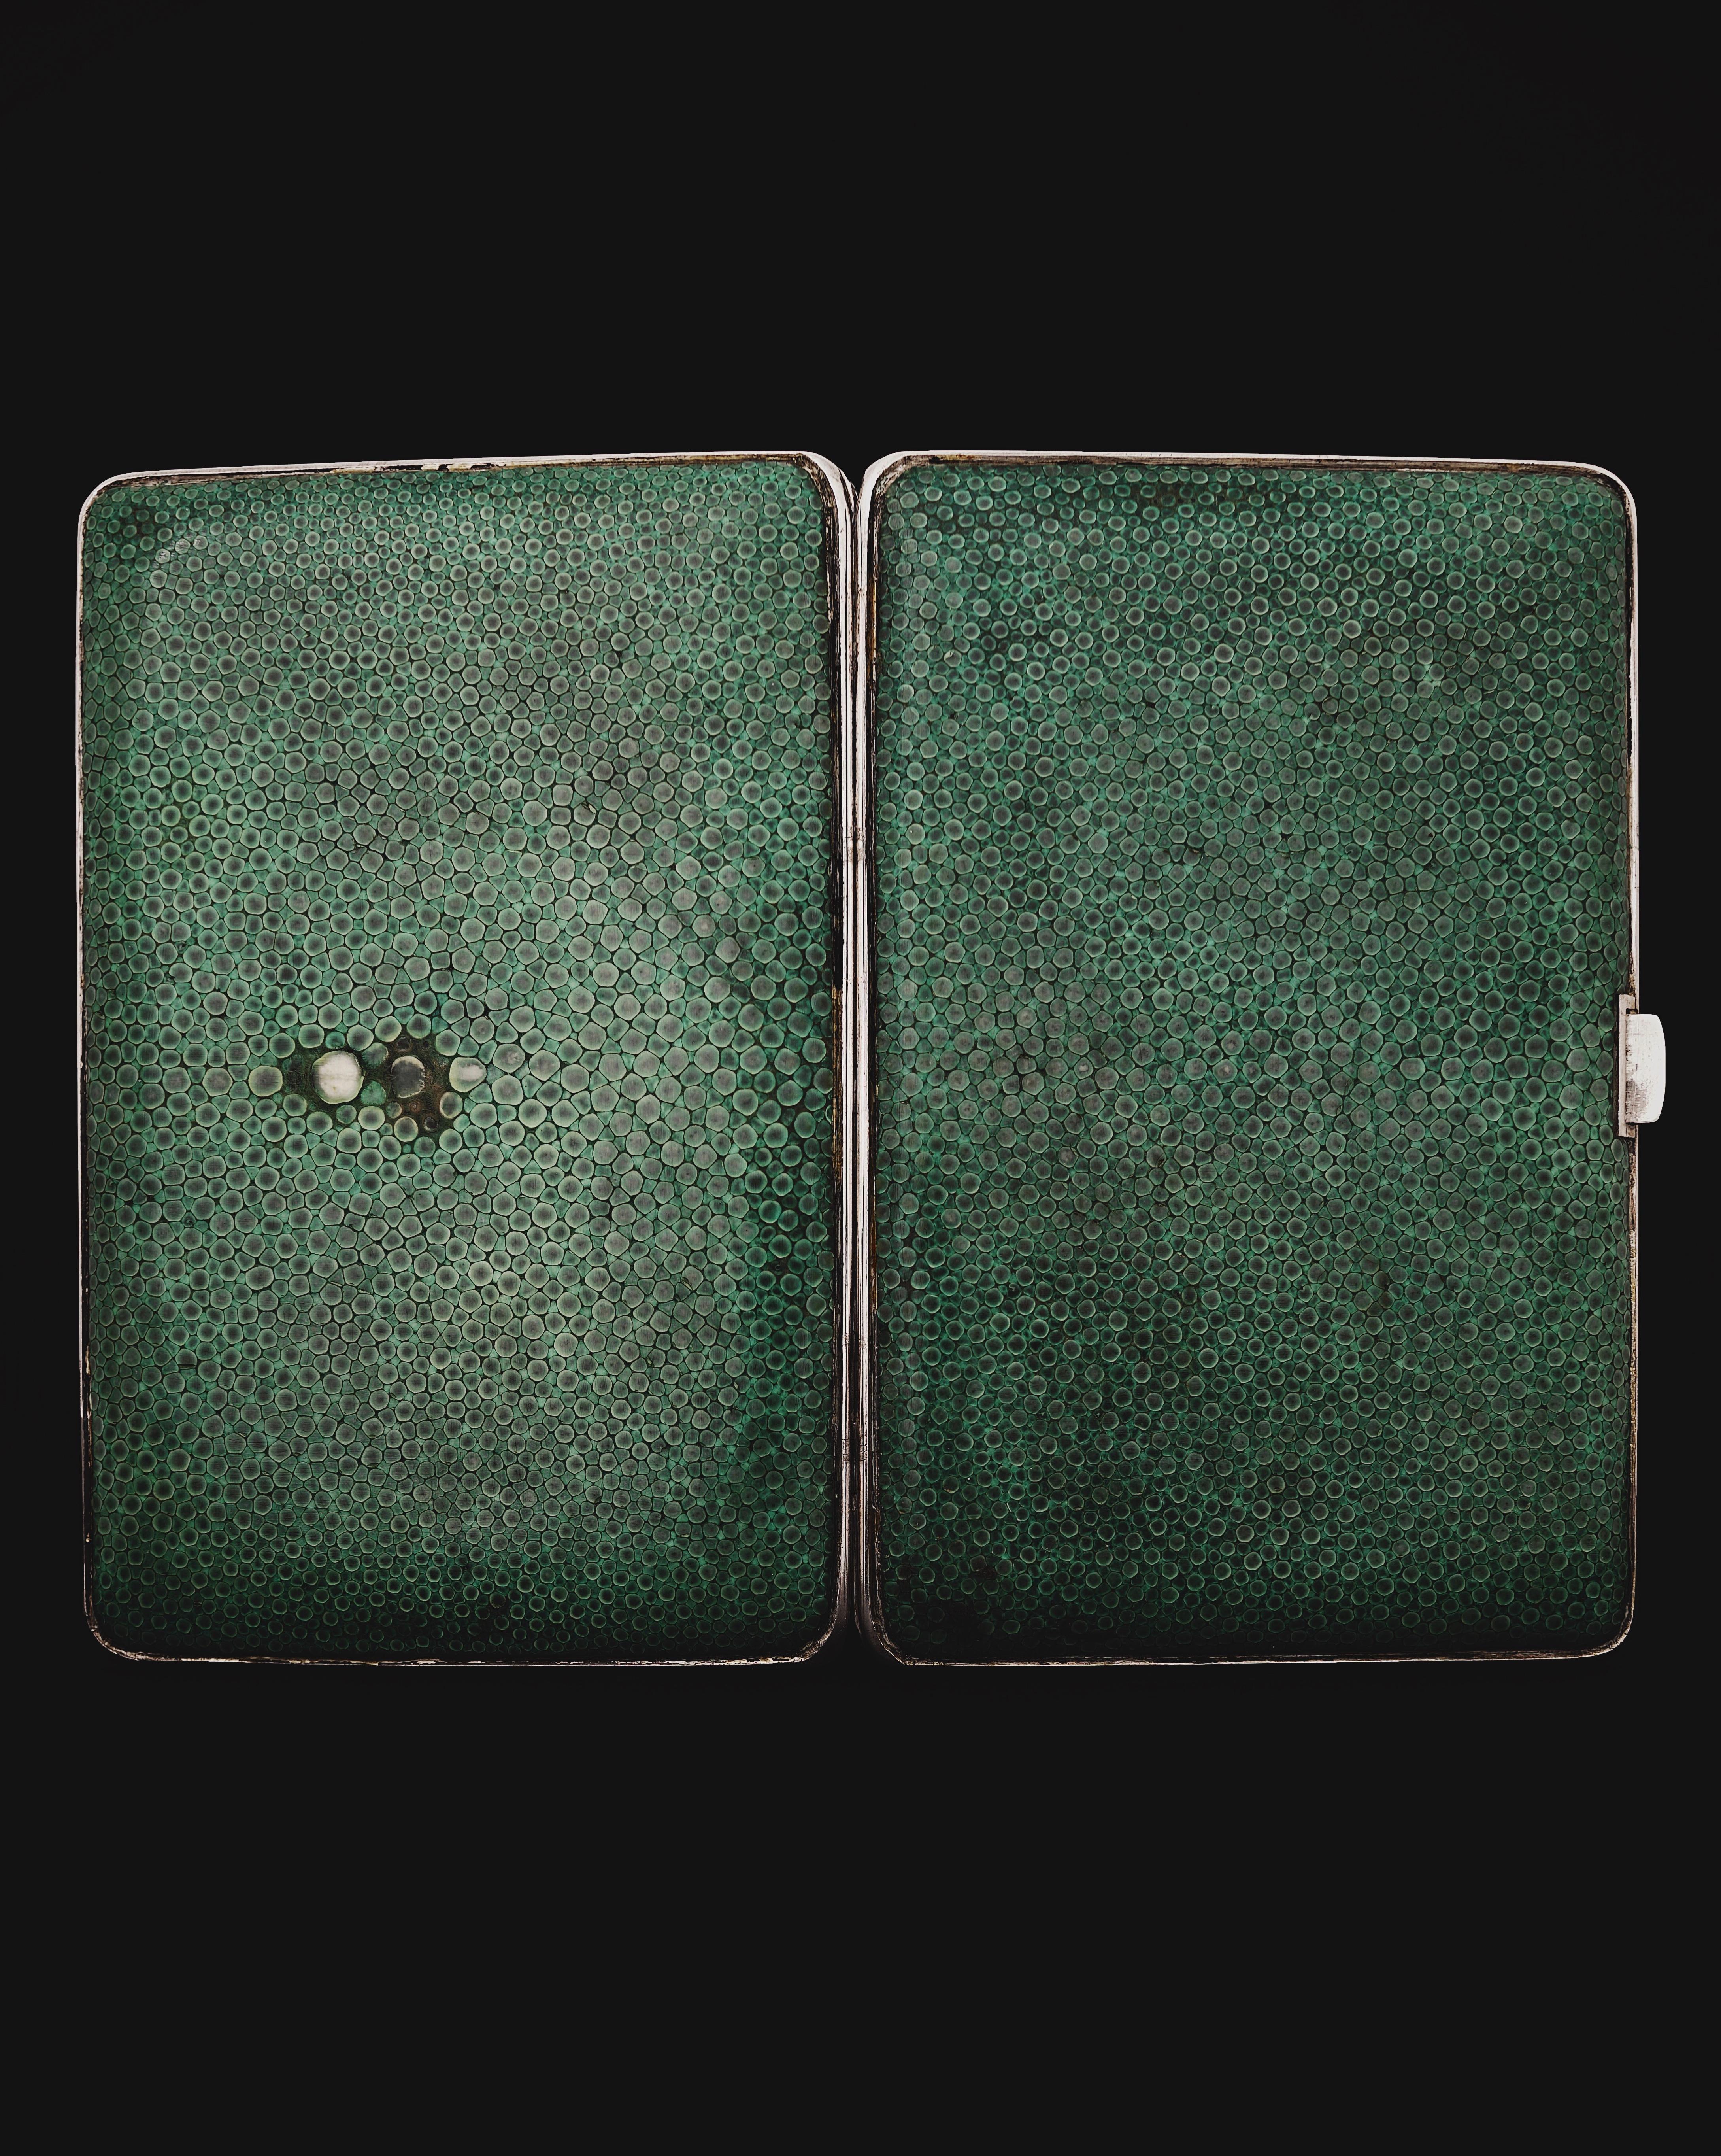 Janesich
Cigarette Case, Circa 1925
Vermeil fully covered with Dark Green Galuchat
Signed 